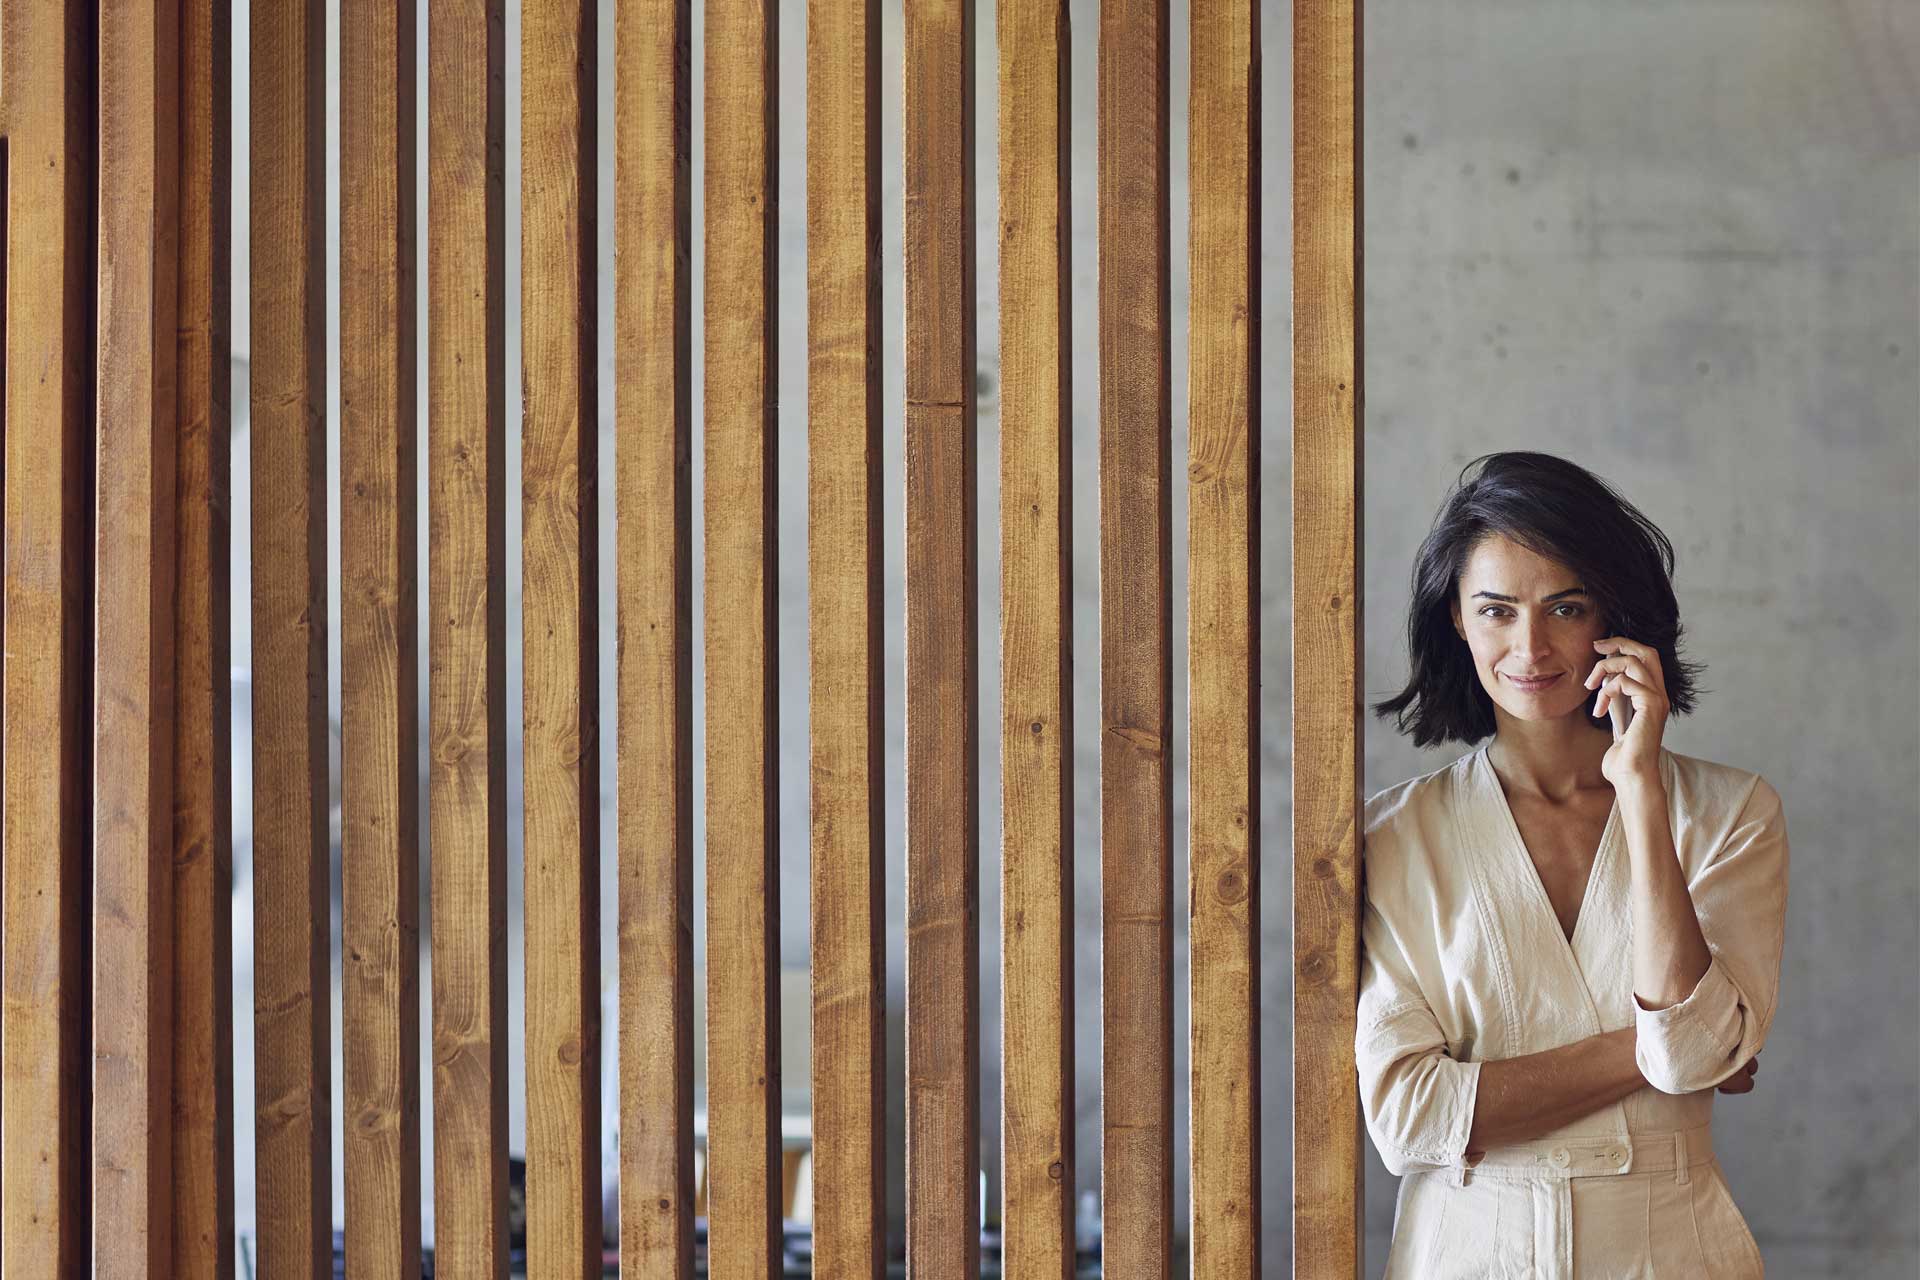 A dark-haired businesswoman stands in front of a wooden wall and smiles at the camera.